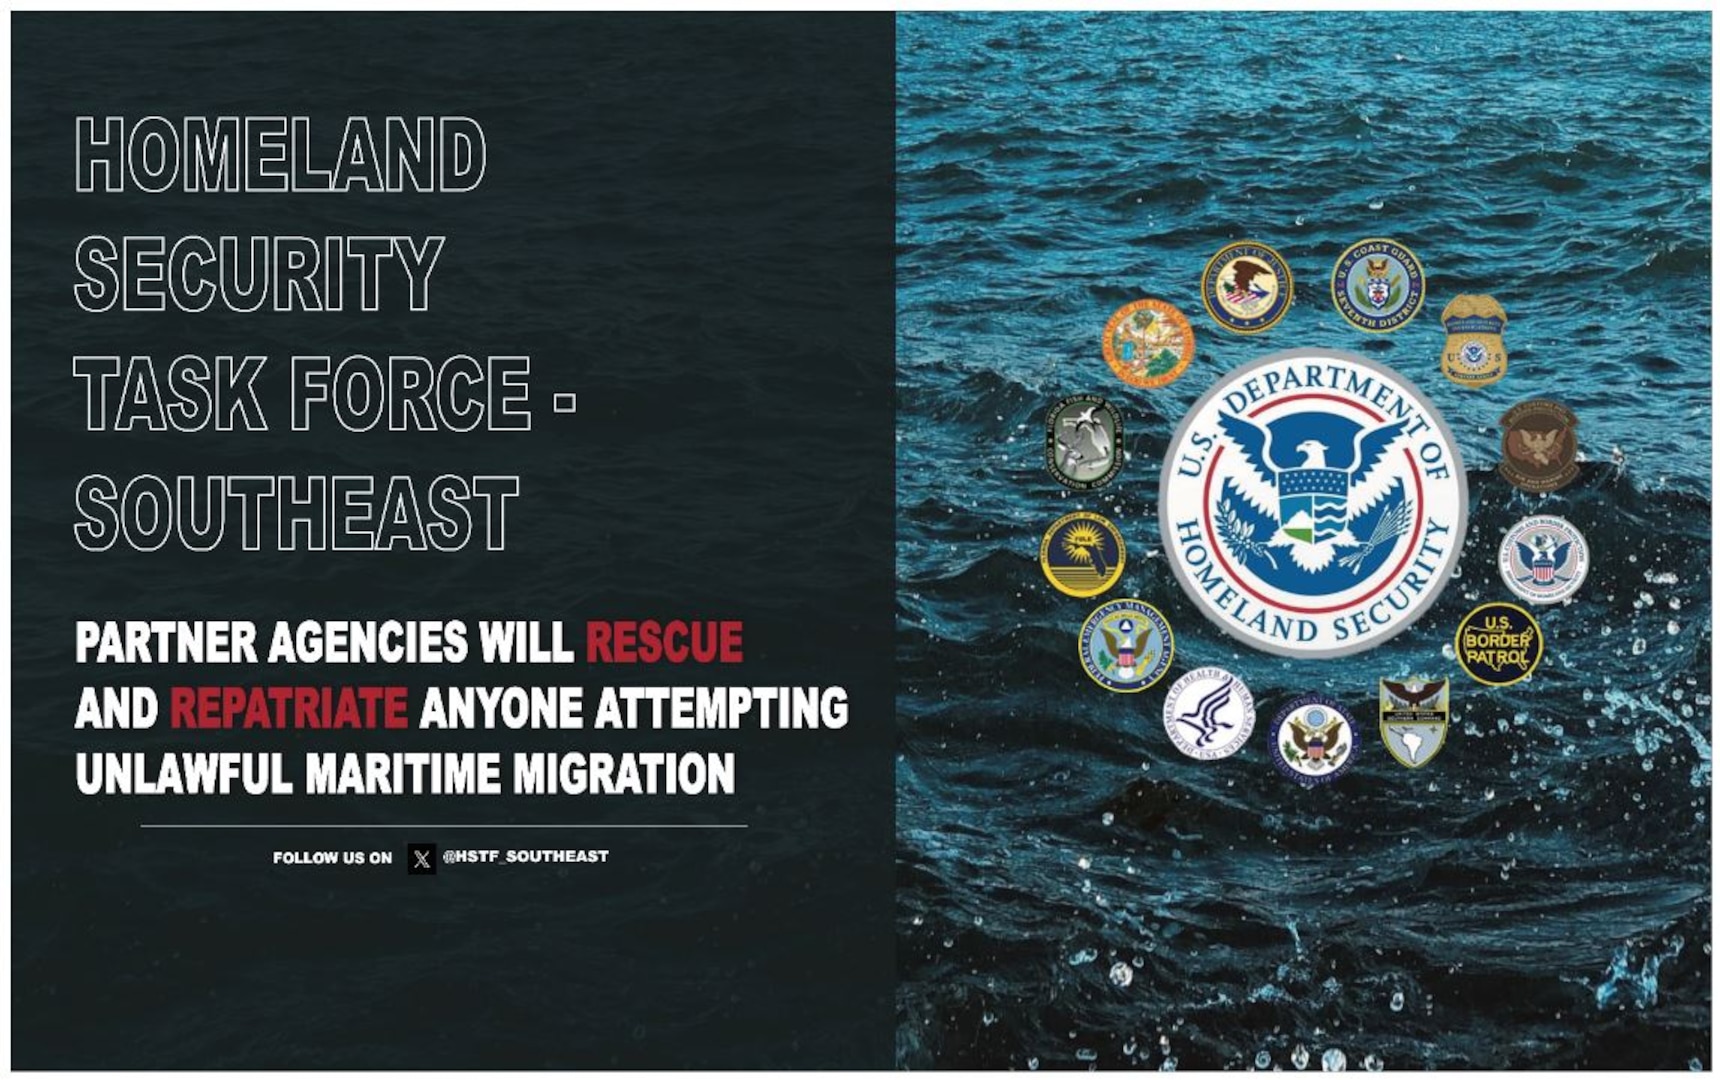 Homeland Security Task Force - Southeast in bold letters over "Partner agencies will rescue and repatriate anyone attempting unlawful maritime migration." To the right the HSTF-SE logo is imposed over waves.